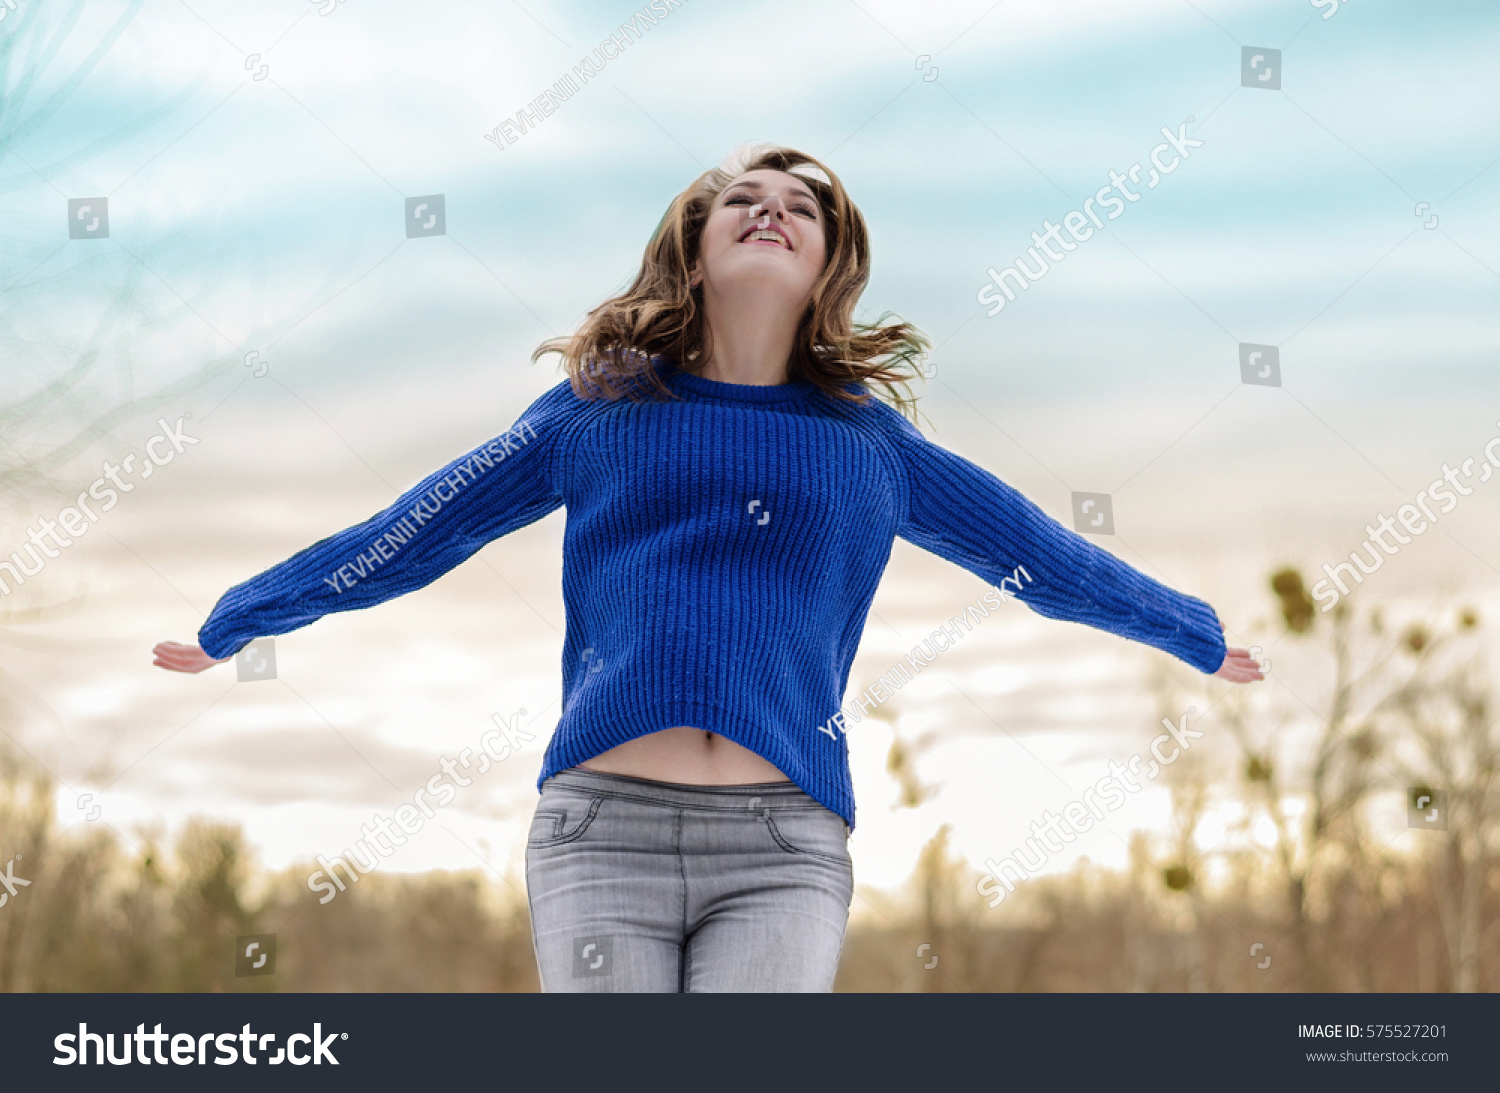 Happy, Smiling Girl in the Forest Positive Attitude and Happiness Spreads His Hands Against the Background of a Beautiful and Colourful Sky #575527201